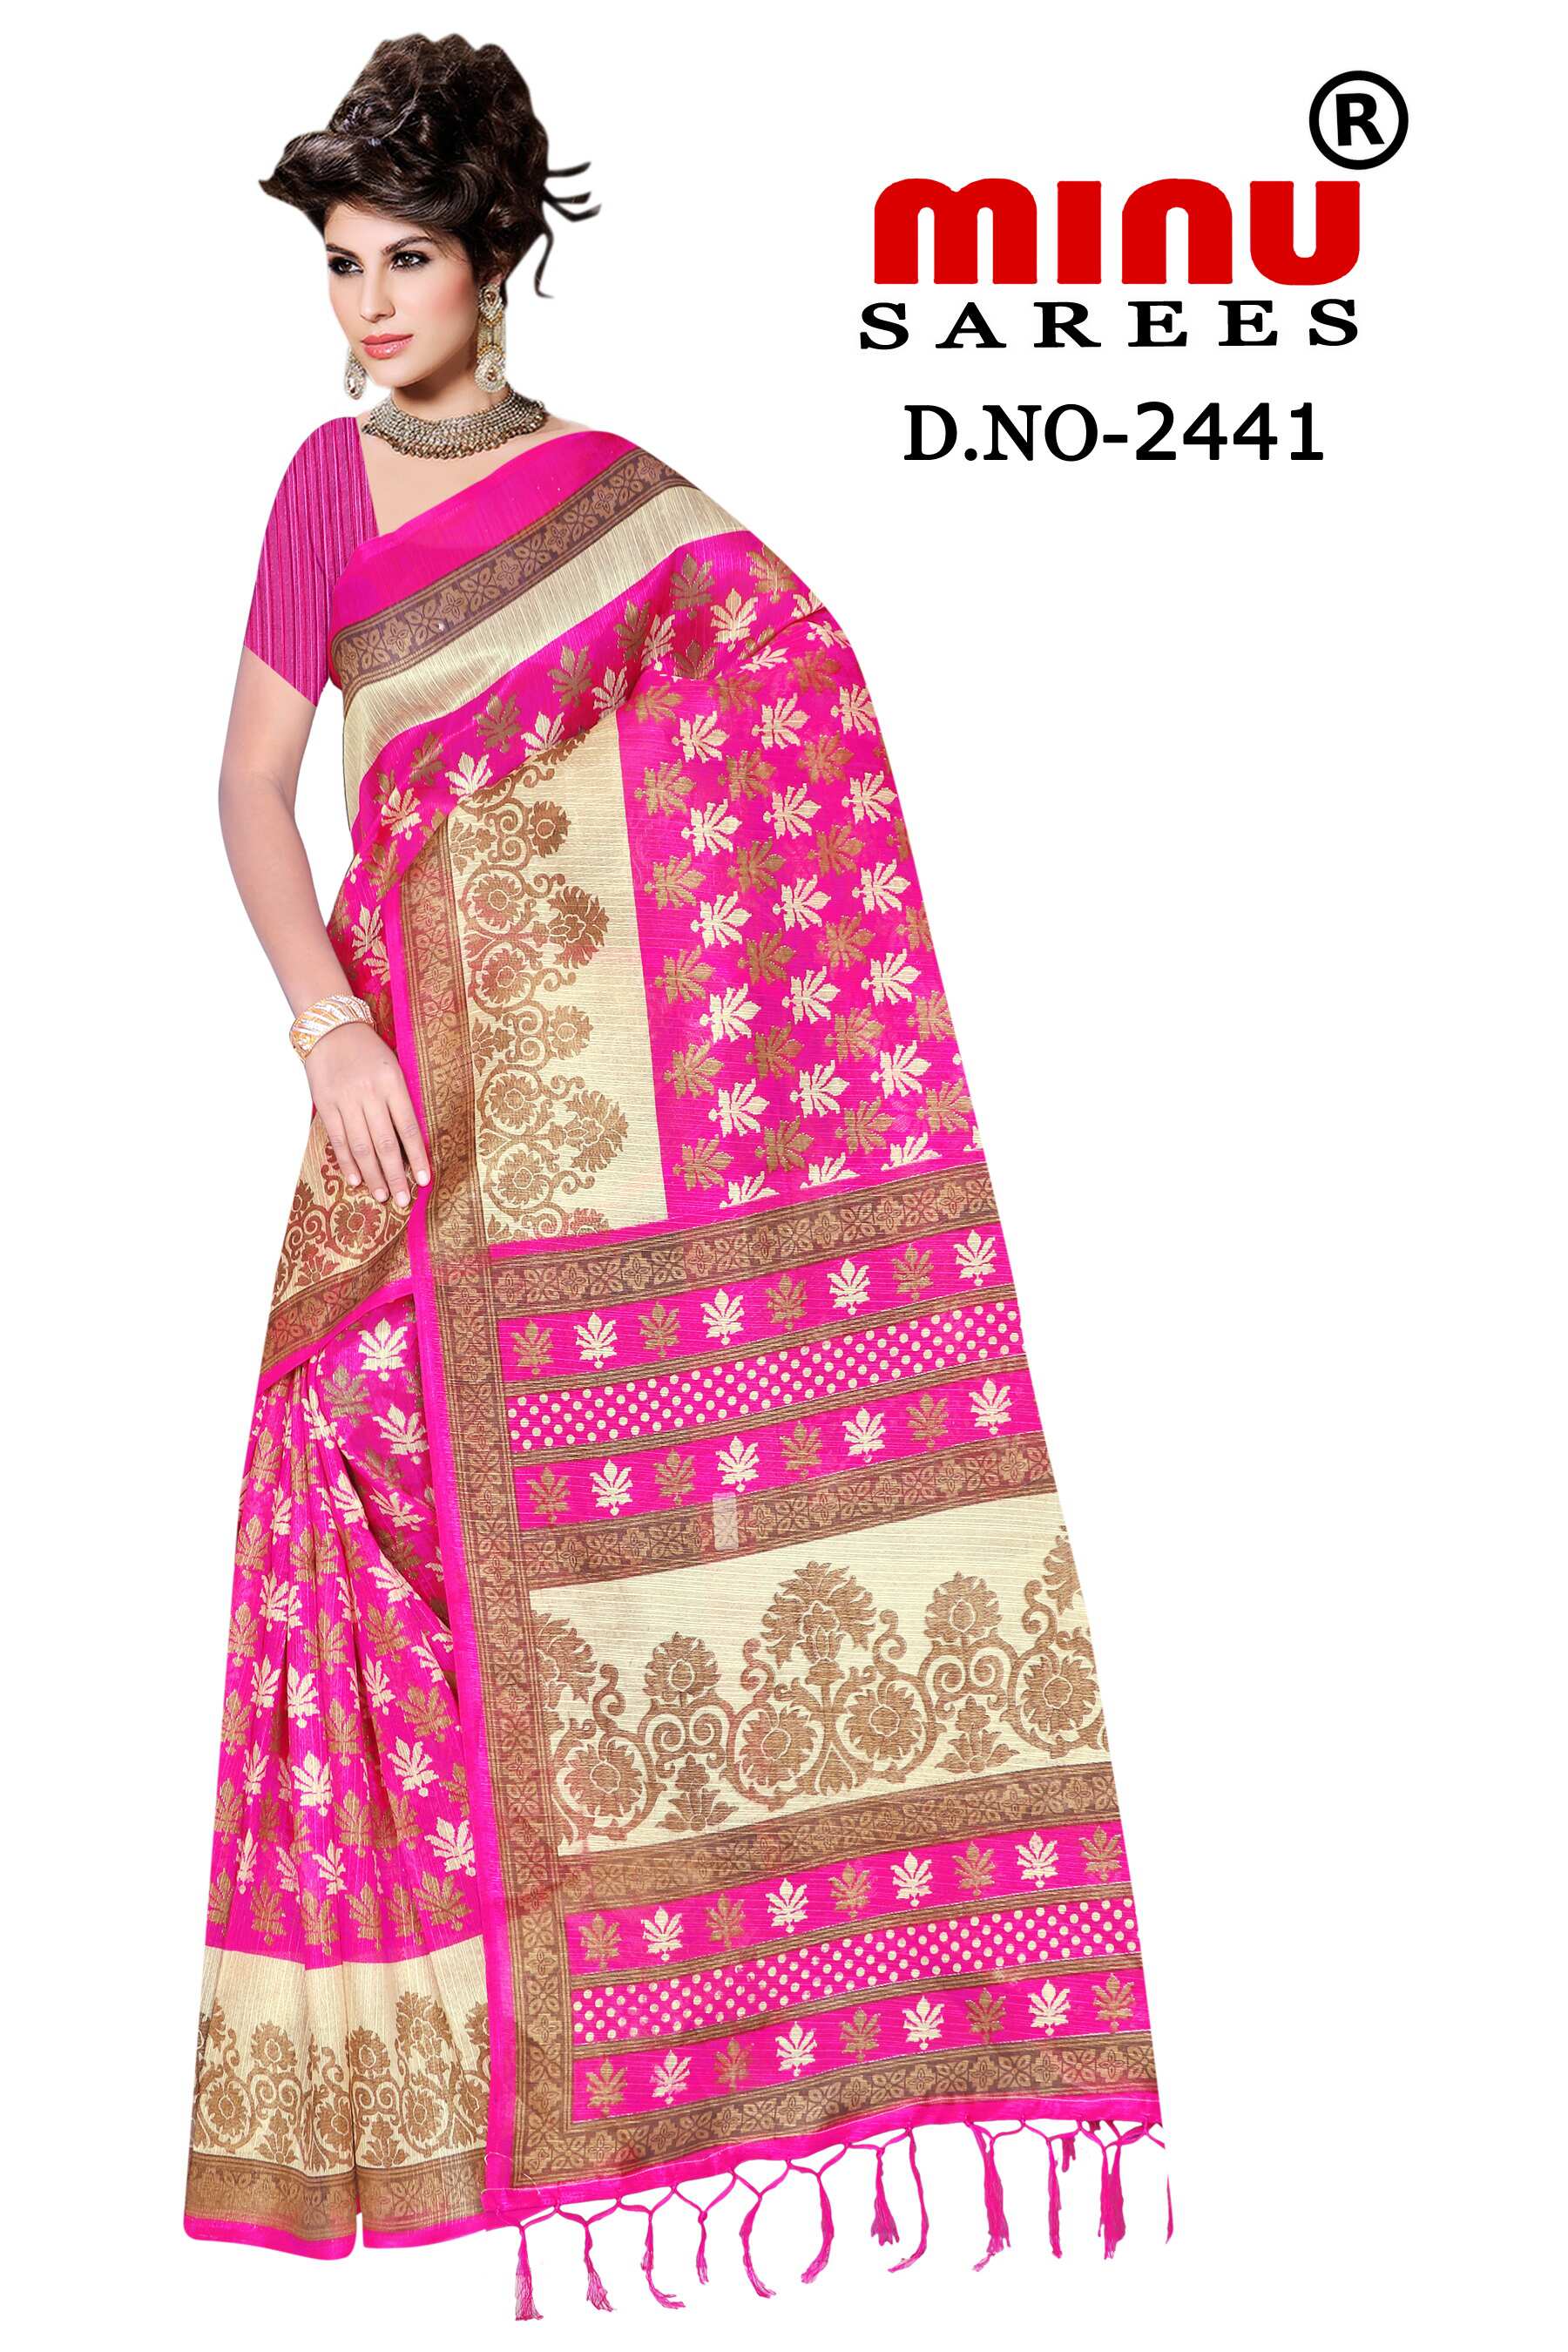 woman wearing fancy saree with modern design image